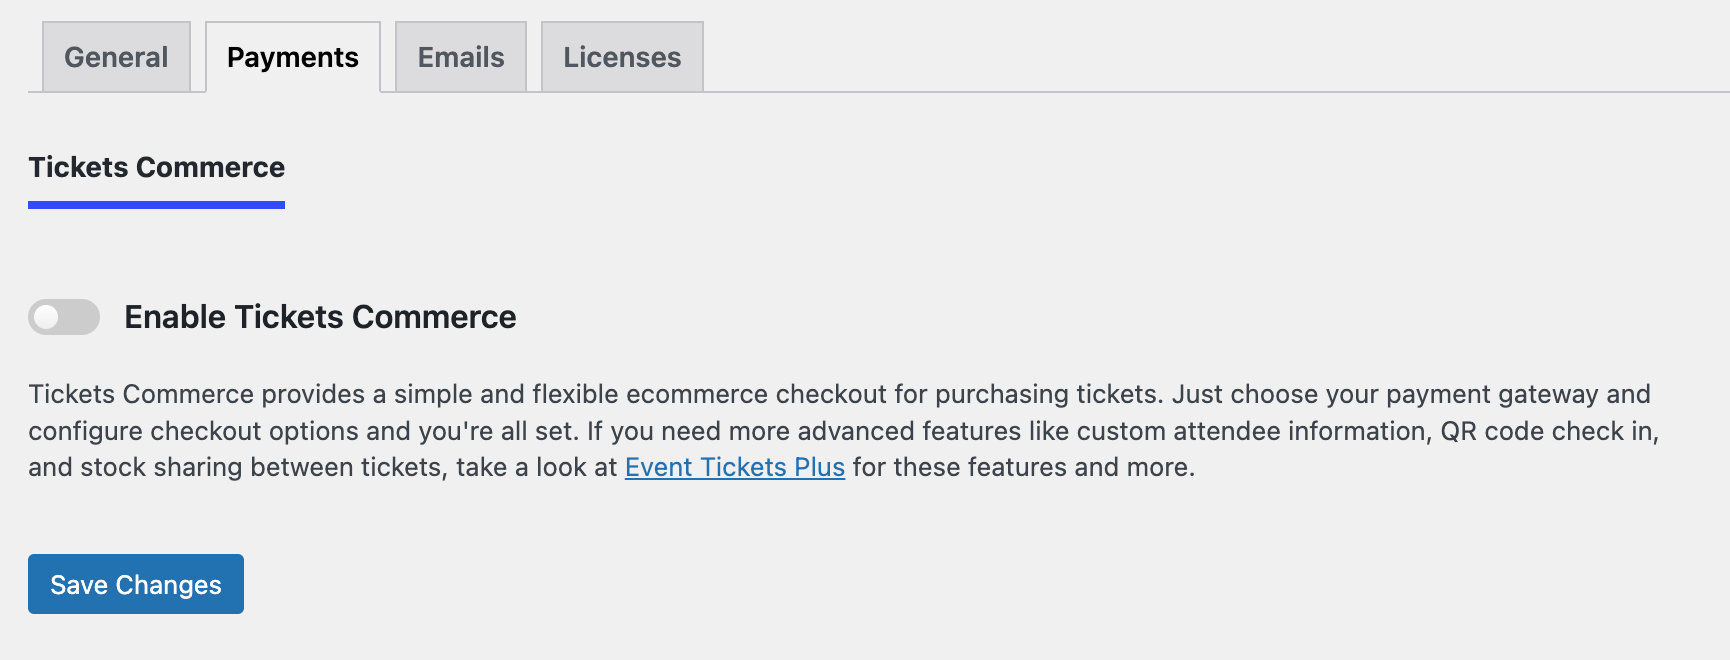 tickets commerce settings page